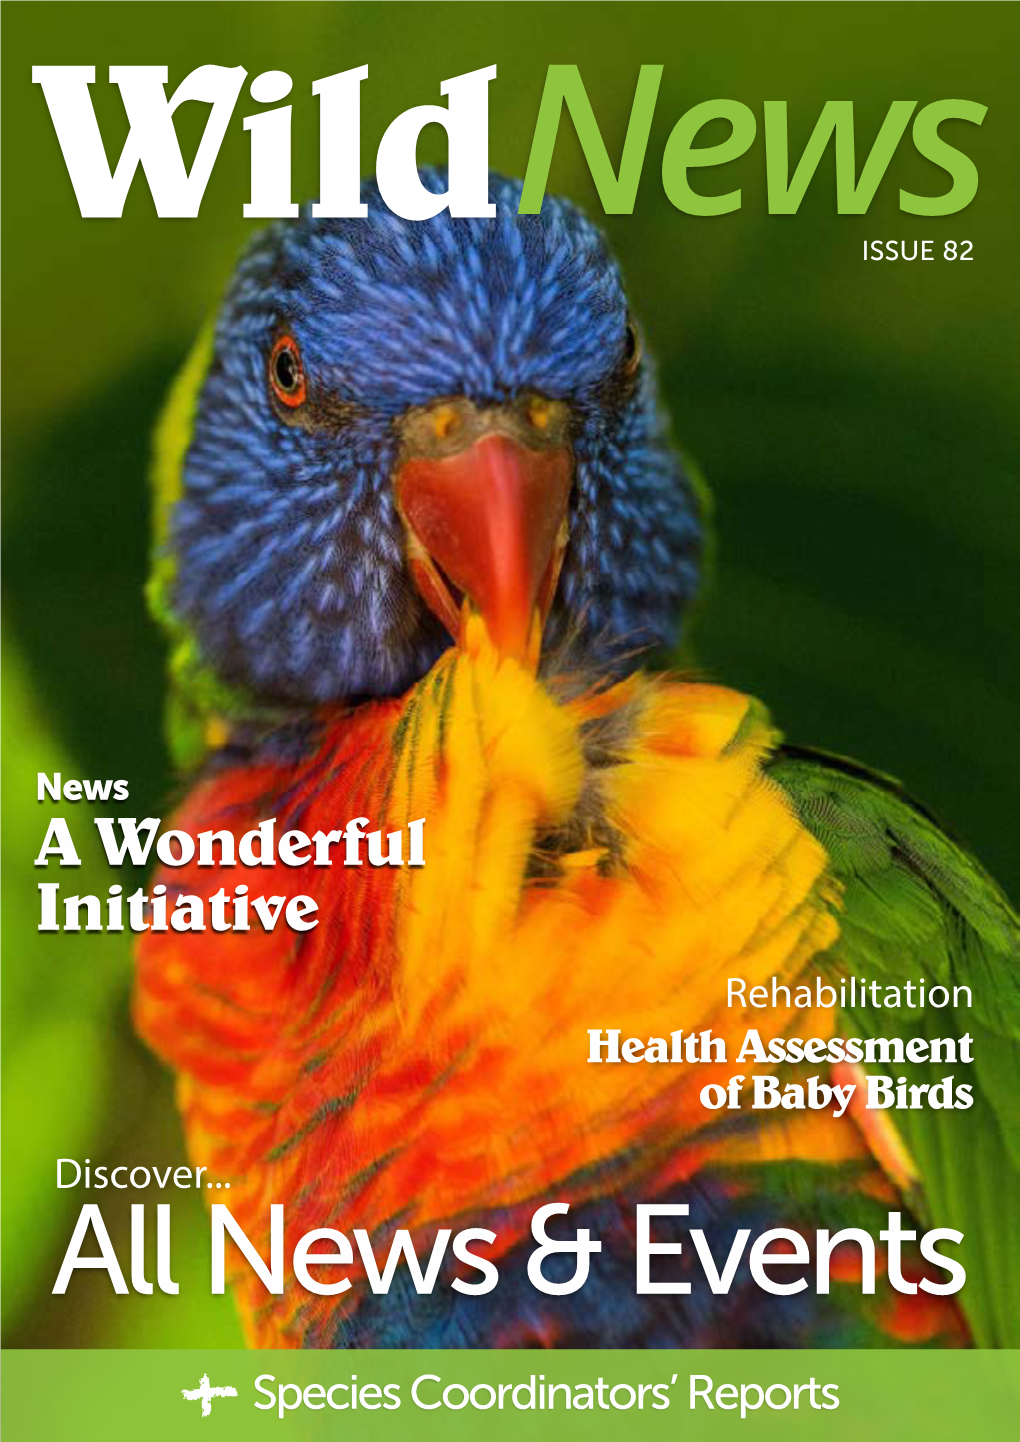 A Wonderful Initiative Rehabilitation Health Assessment of Baby Birds Discover